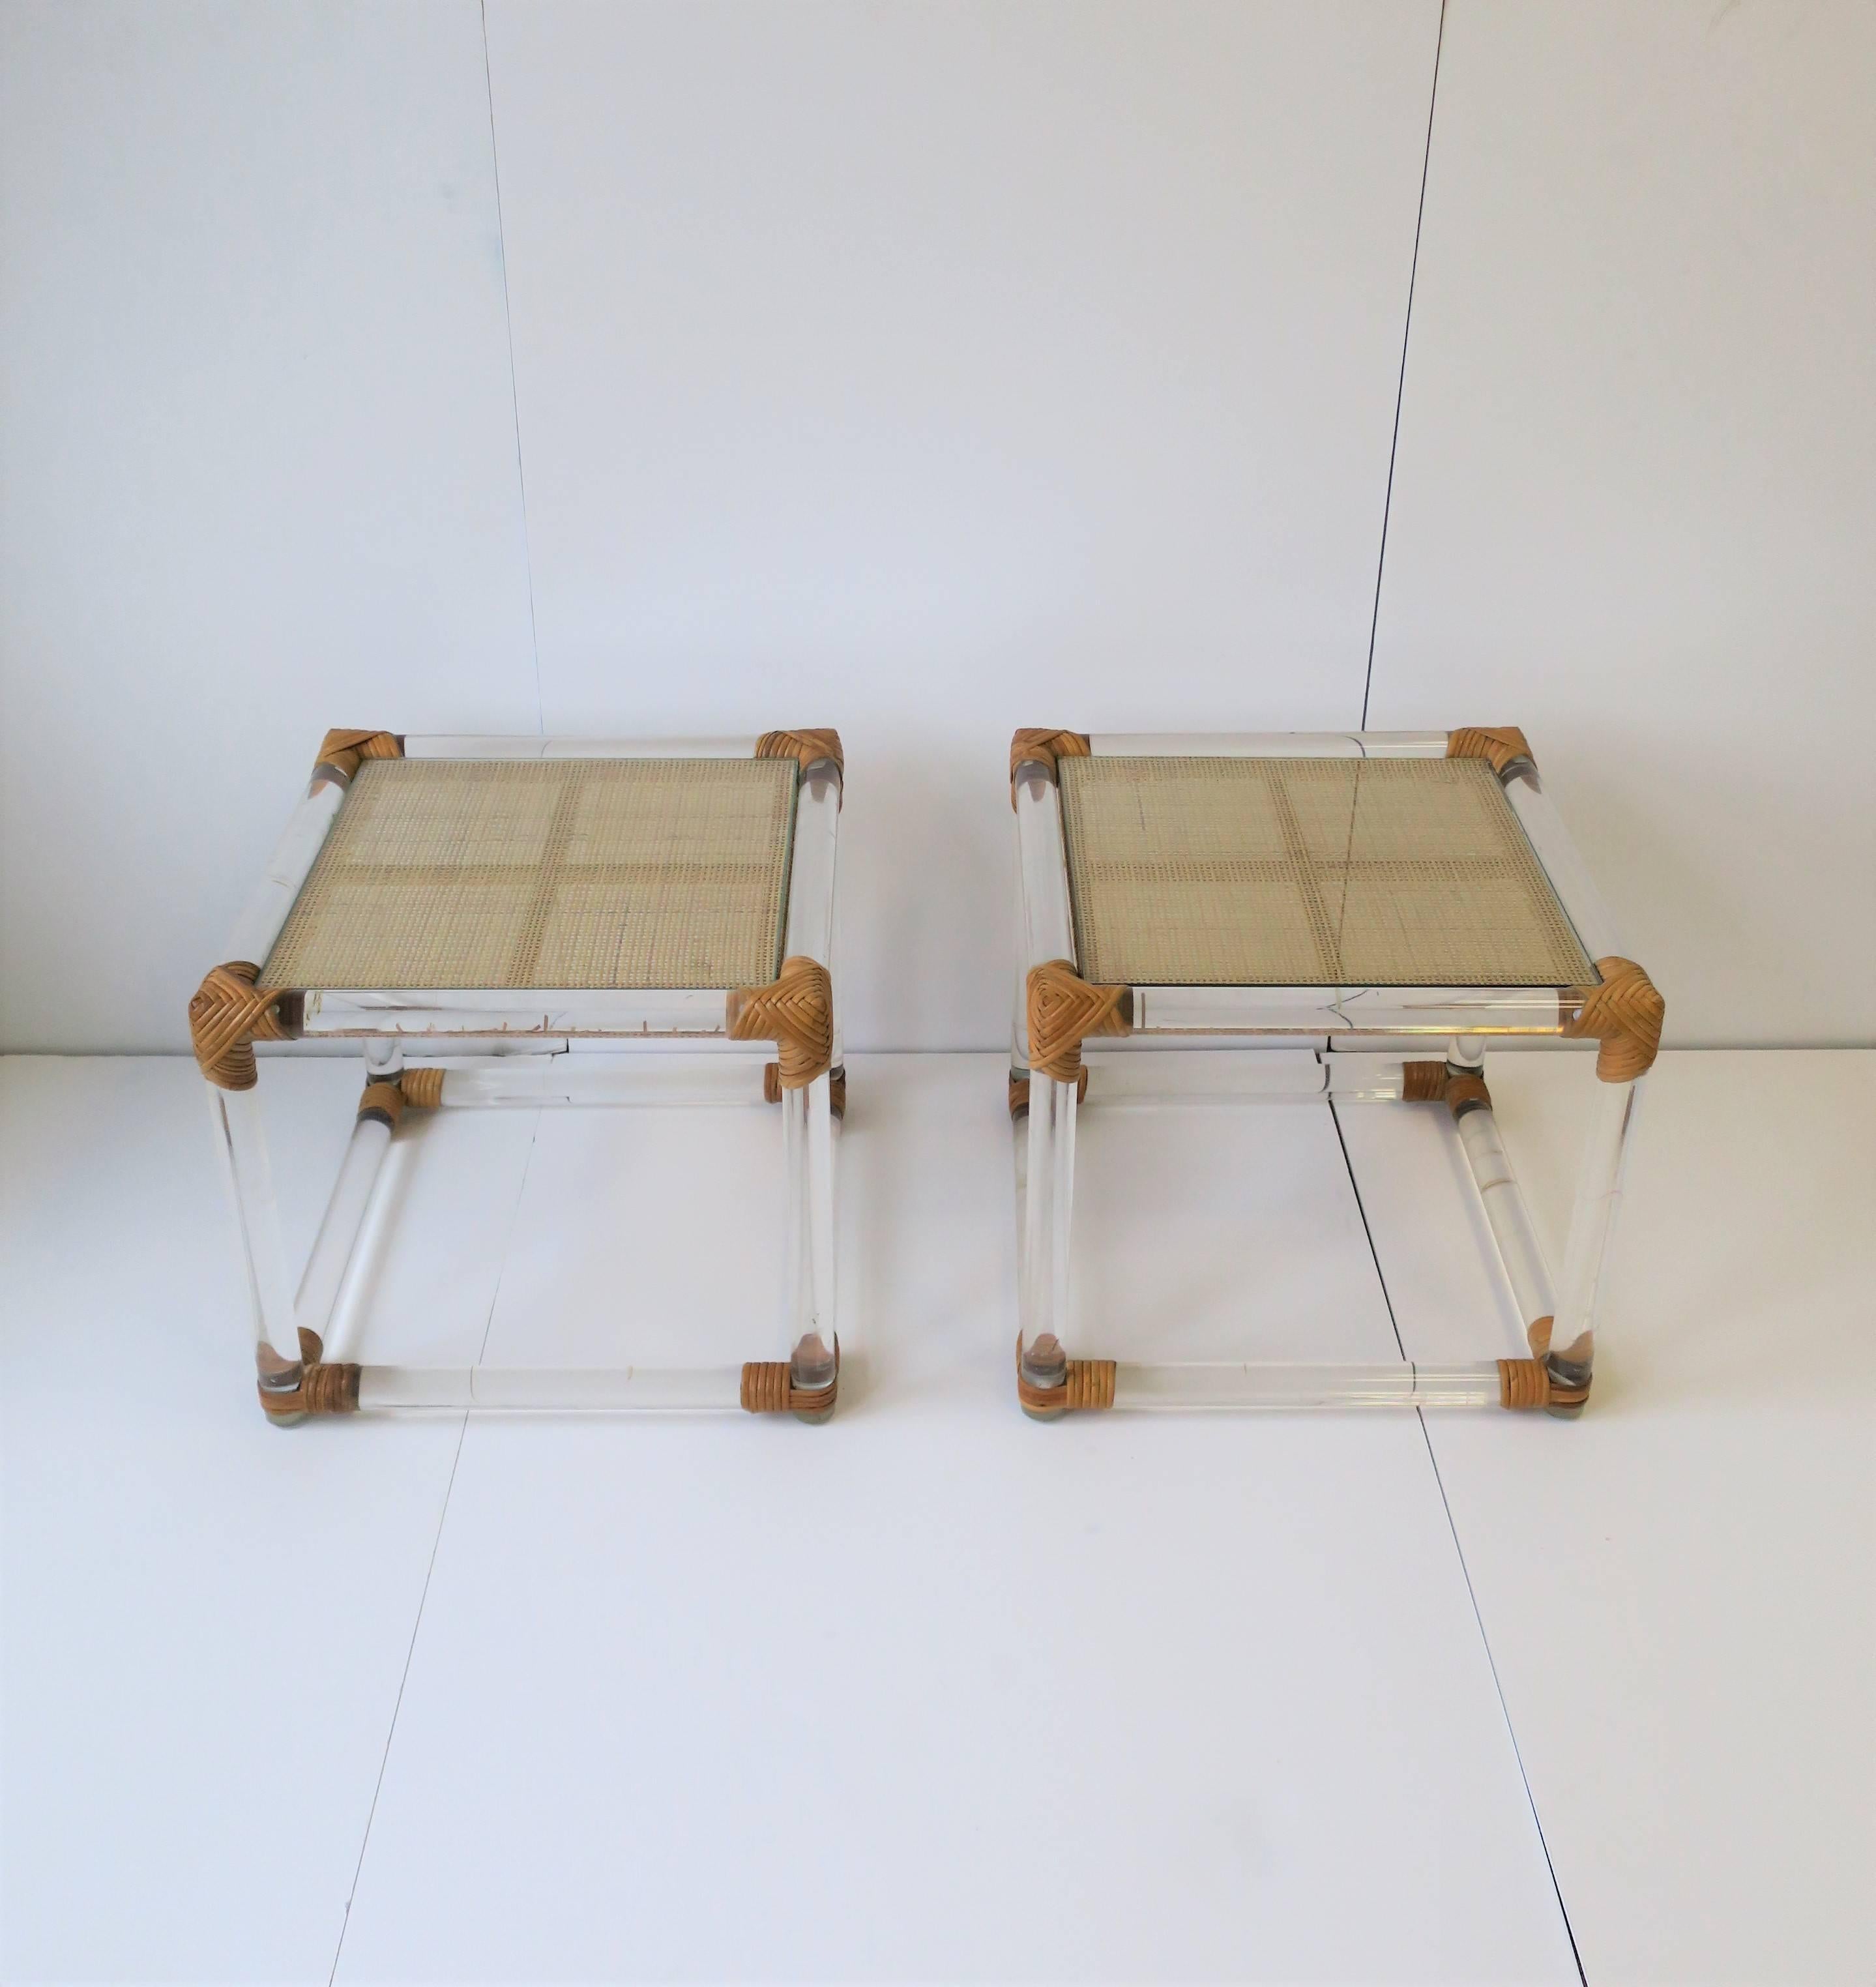 A pair of beautiful Postmodern or Modern style Lucite and wicker rattan end tables, or nightstand tables, circa late 1970s - 1980s. Tables have a wicker top with an inset glass top making for a stable environment. Glass and wicker tops are